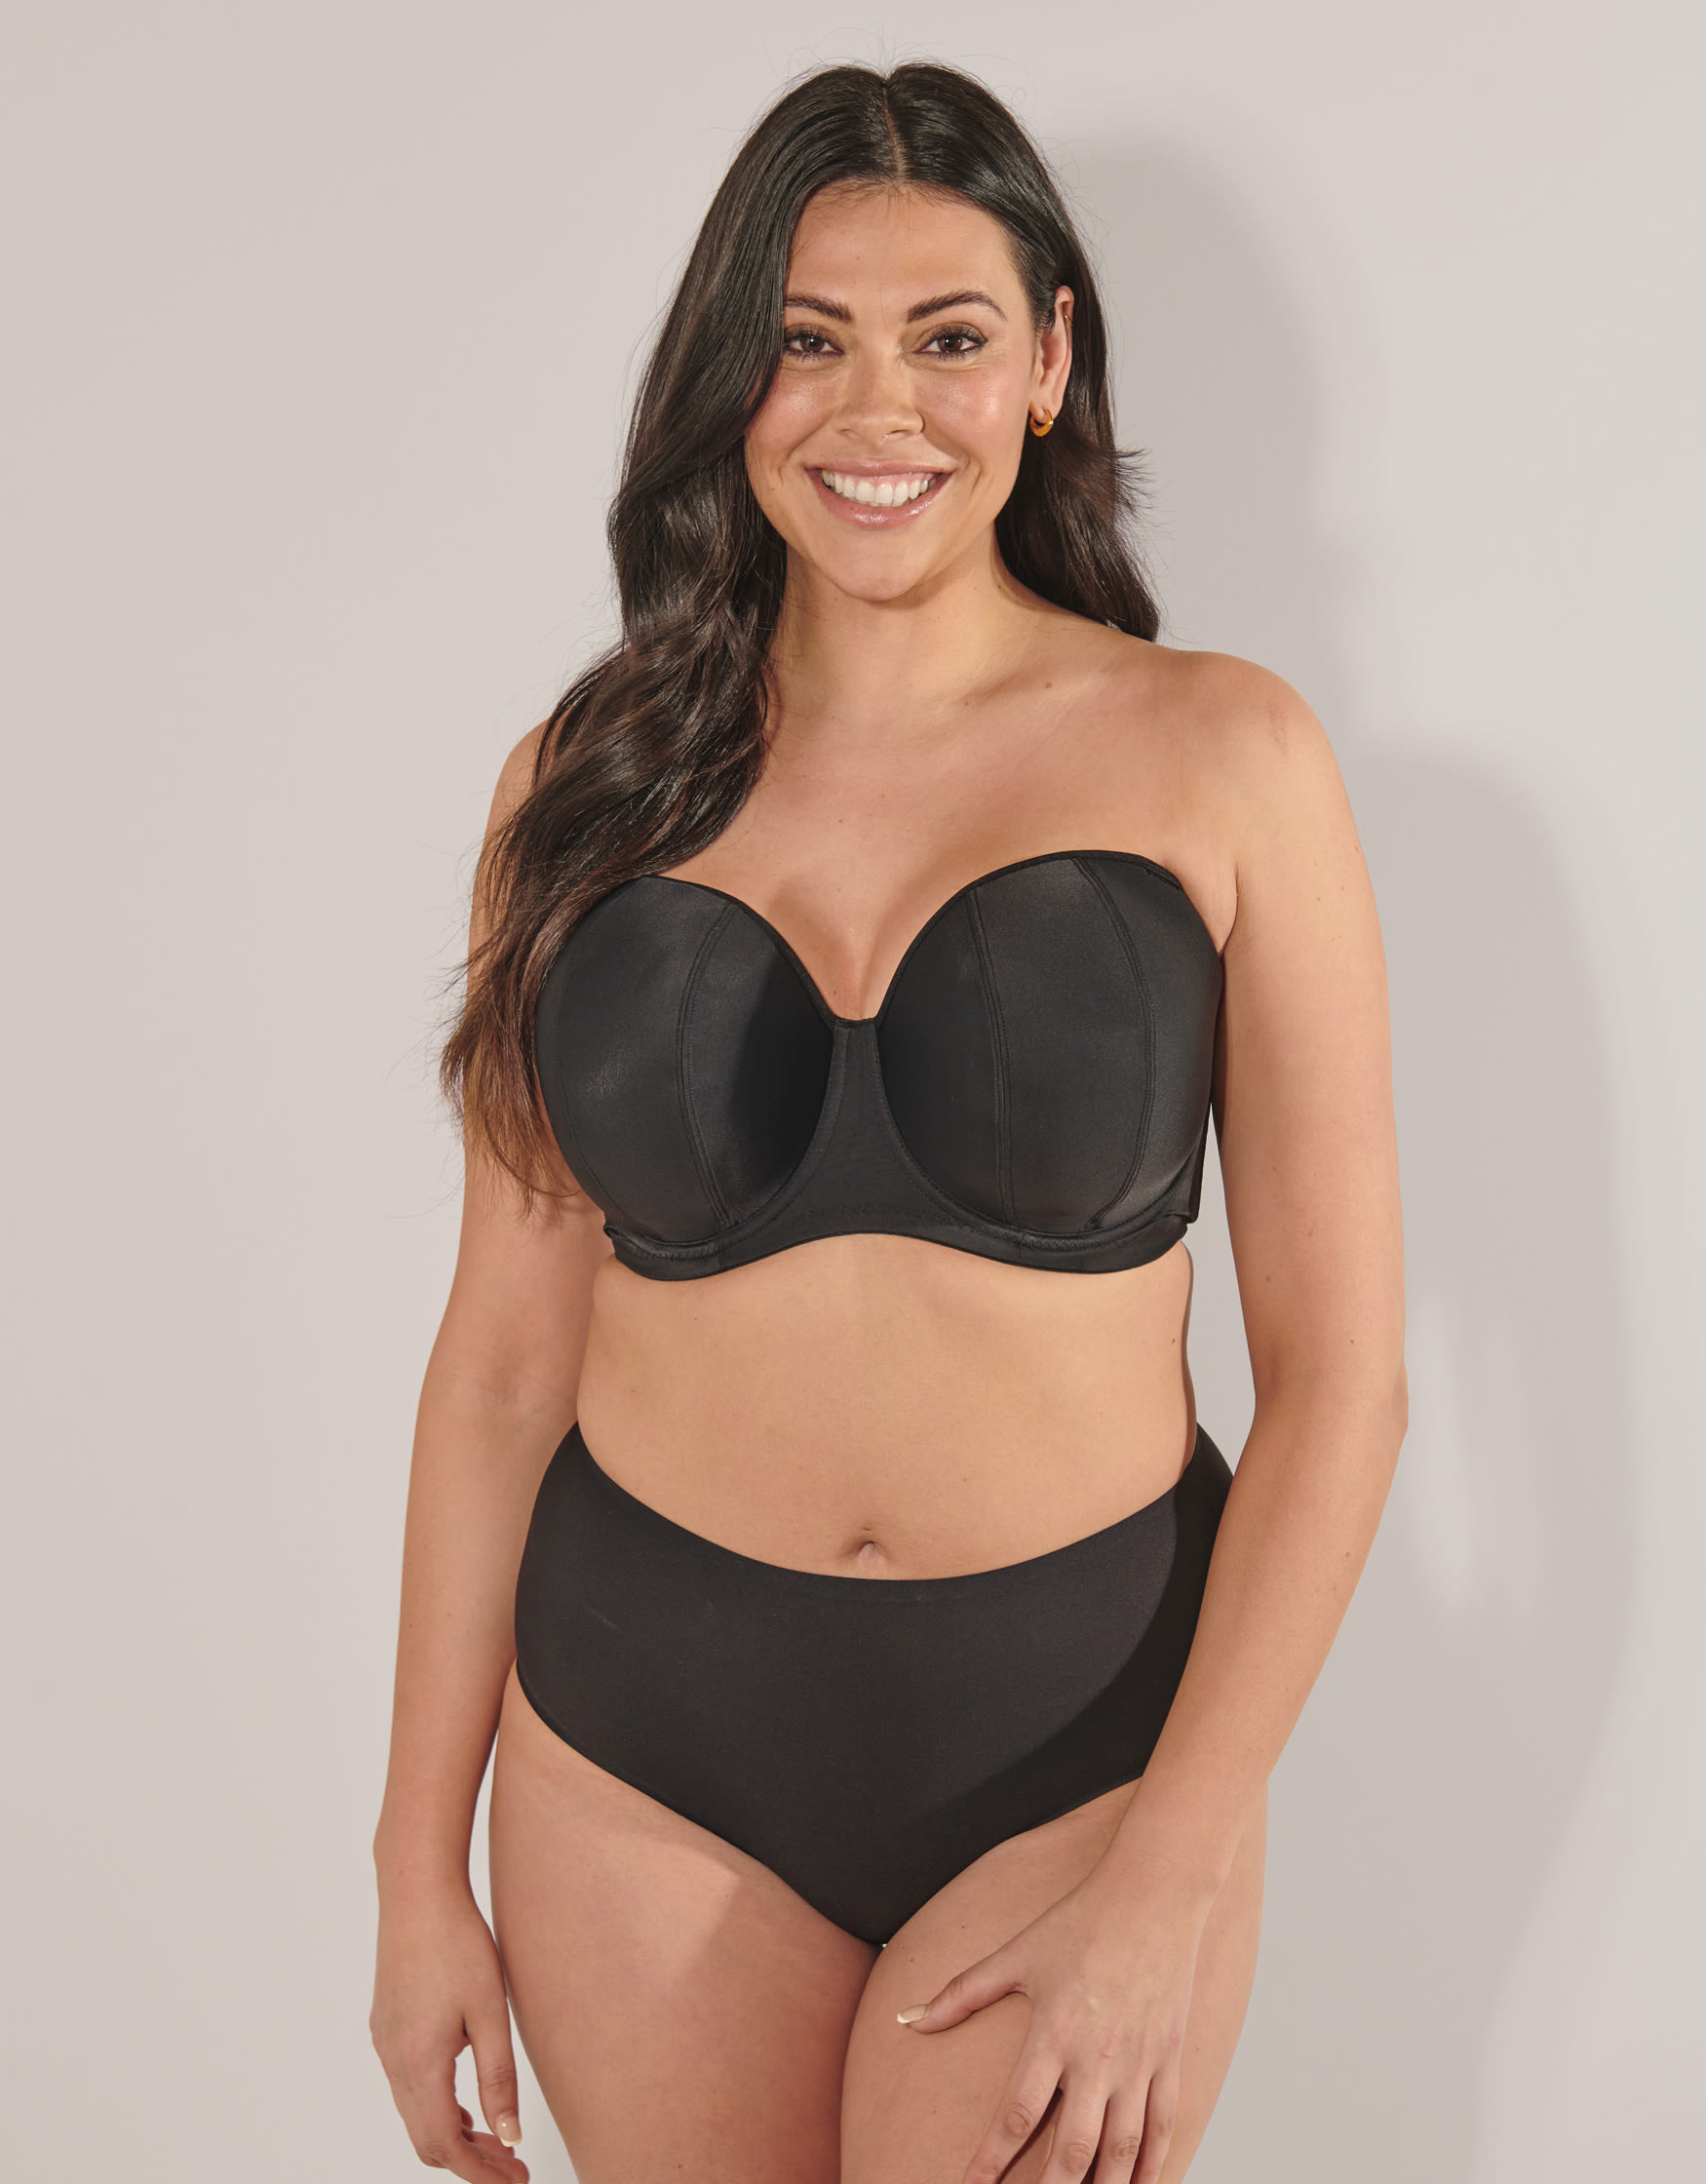 Multiway and Strapless Bras for Big Busts